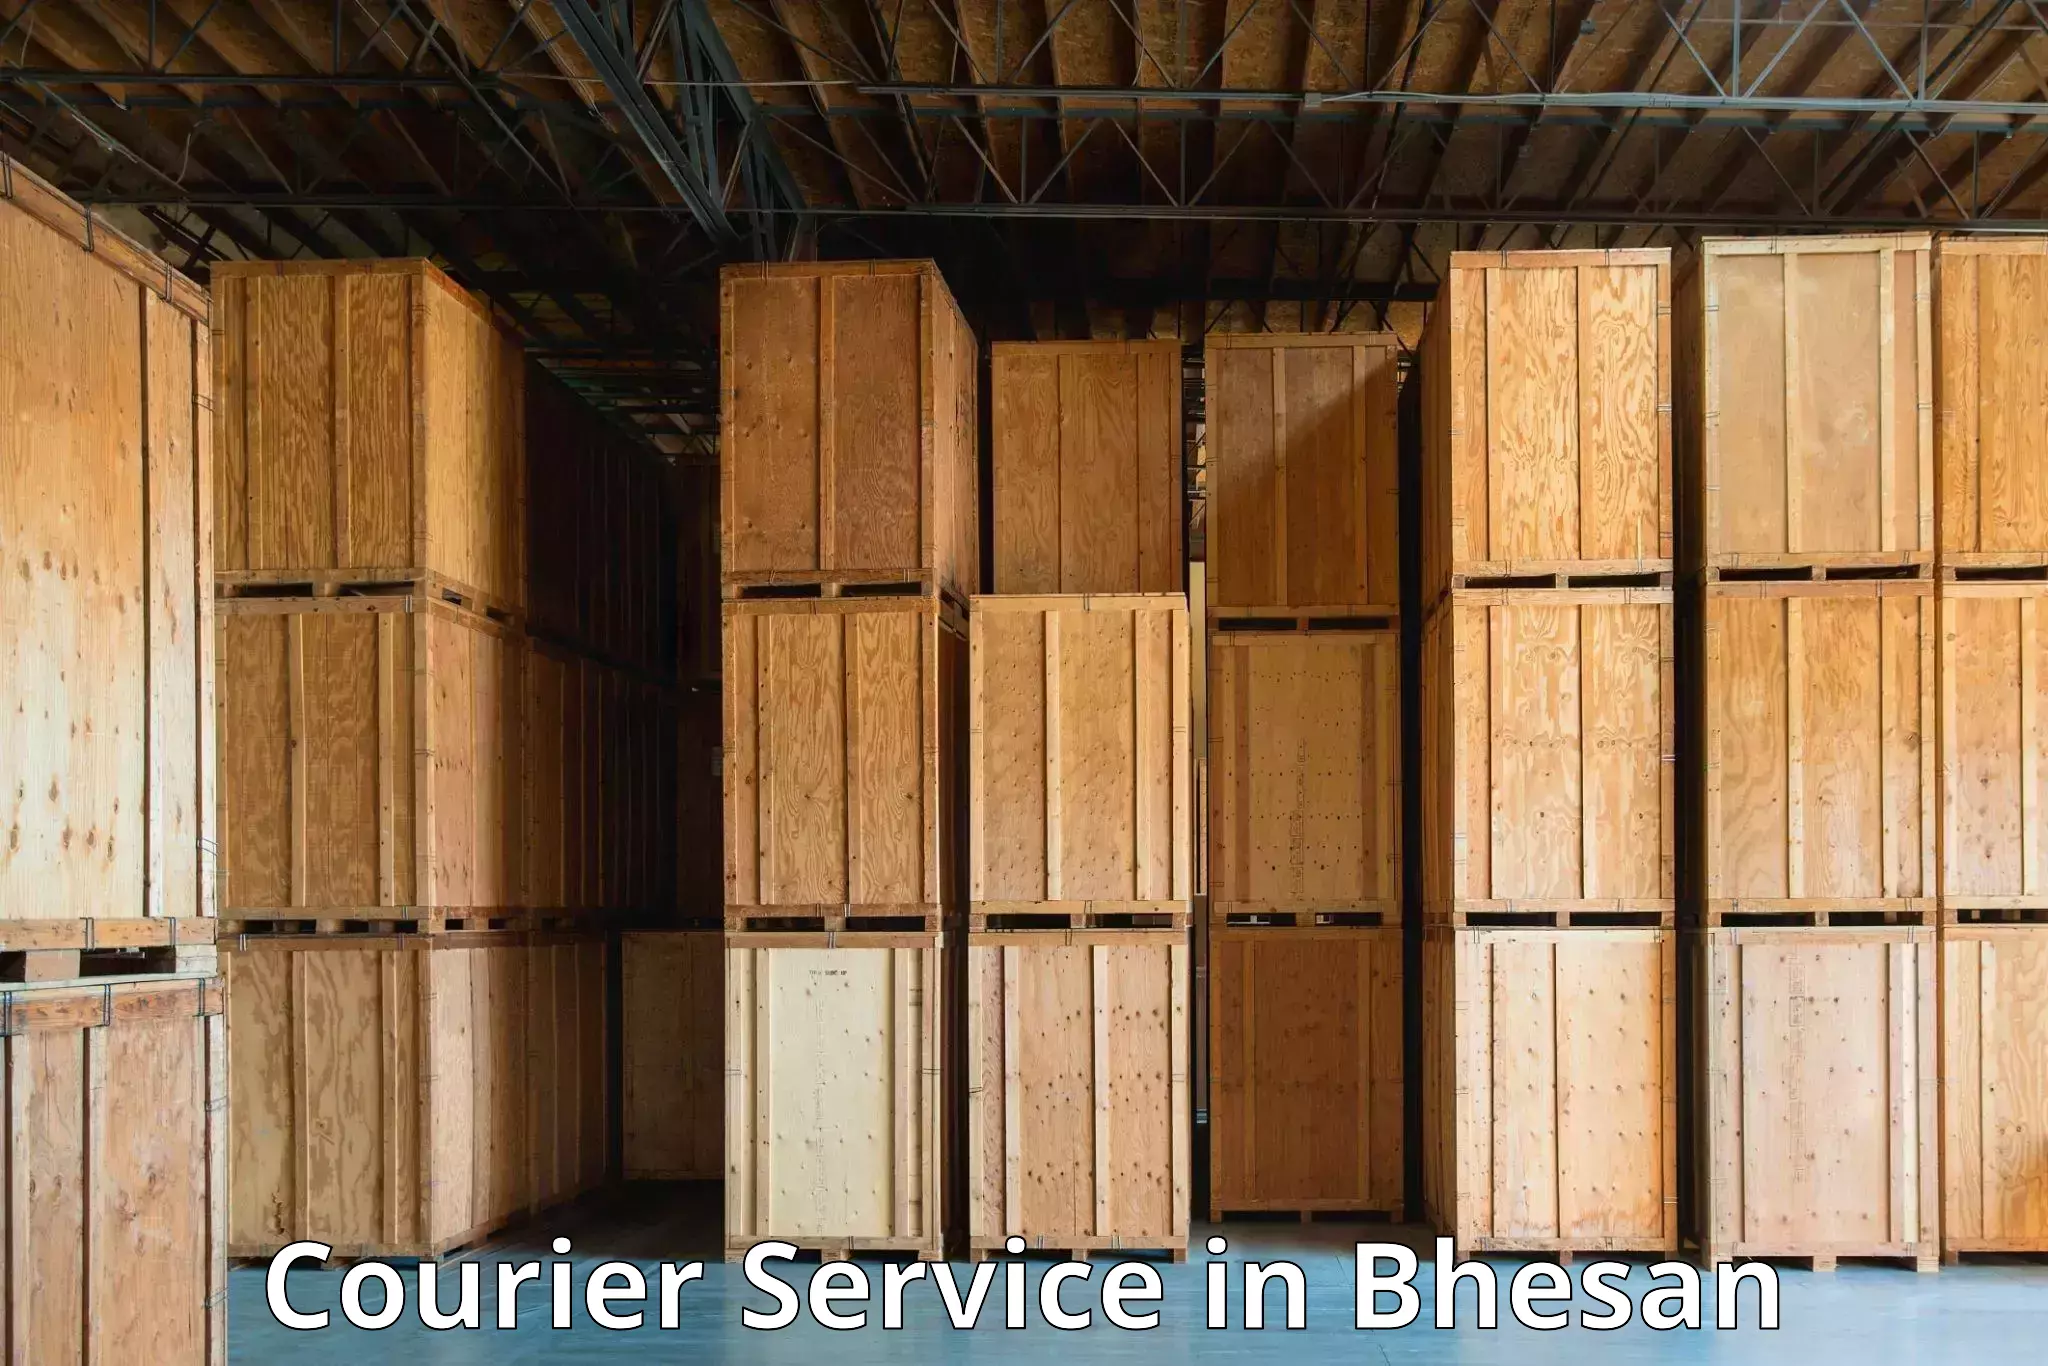 Business logistics support in Bhesan